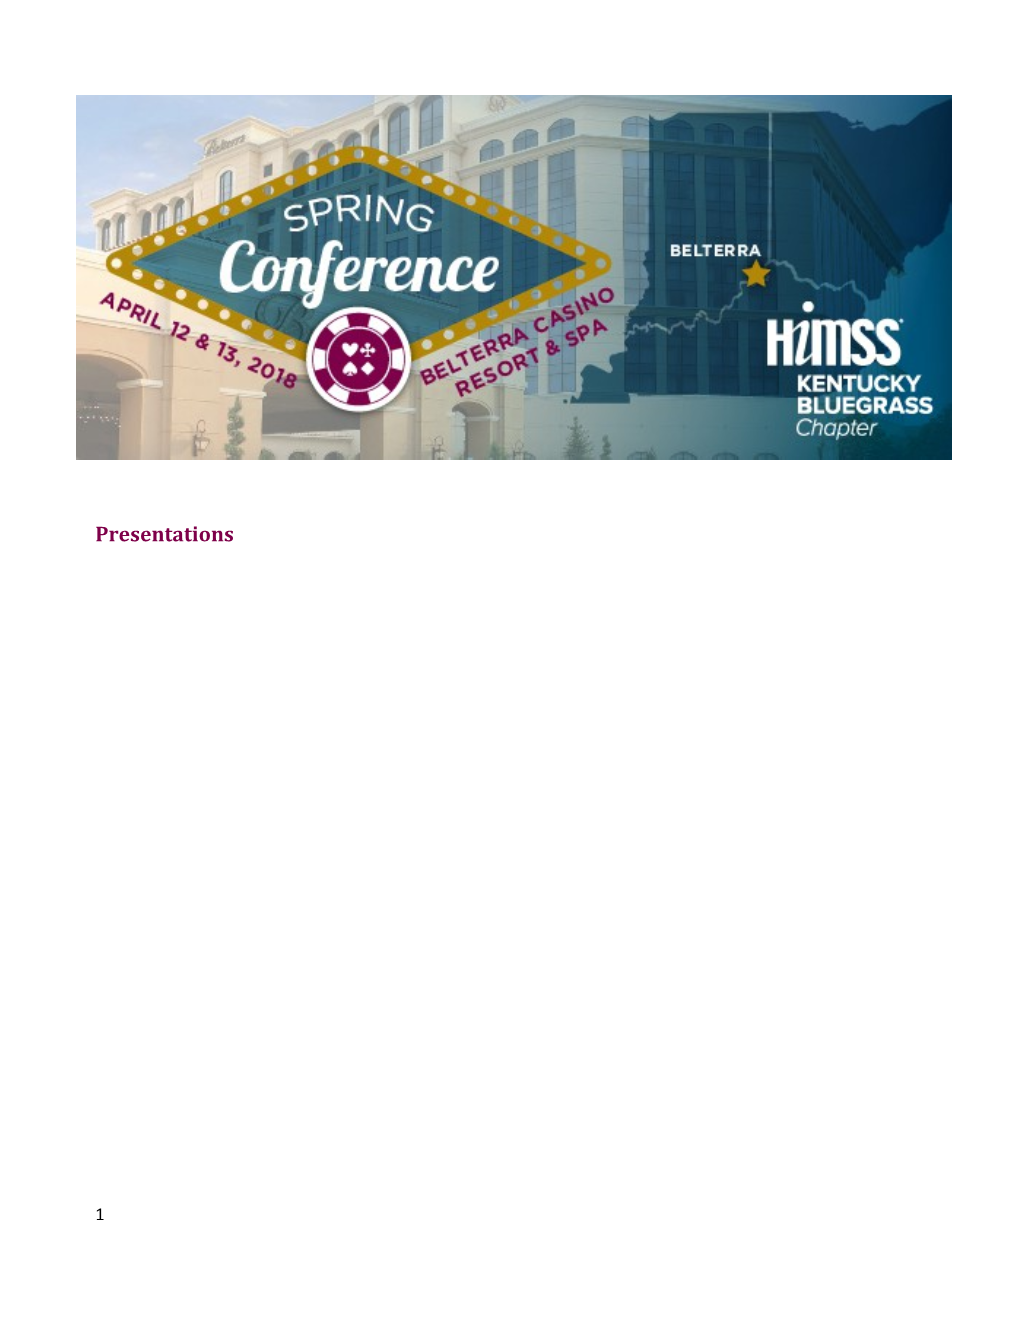 KY Bluegrass Chapter of HIMSS 2018 Presentations